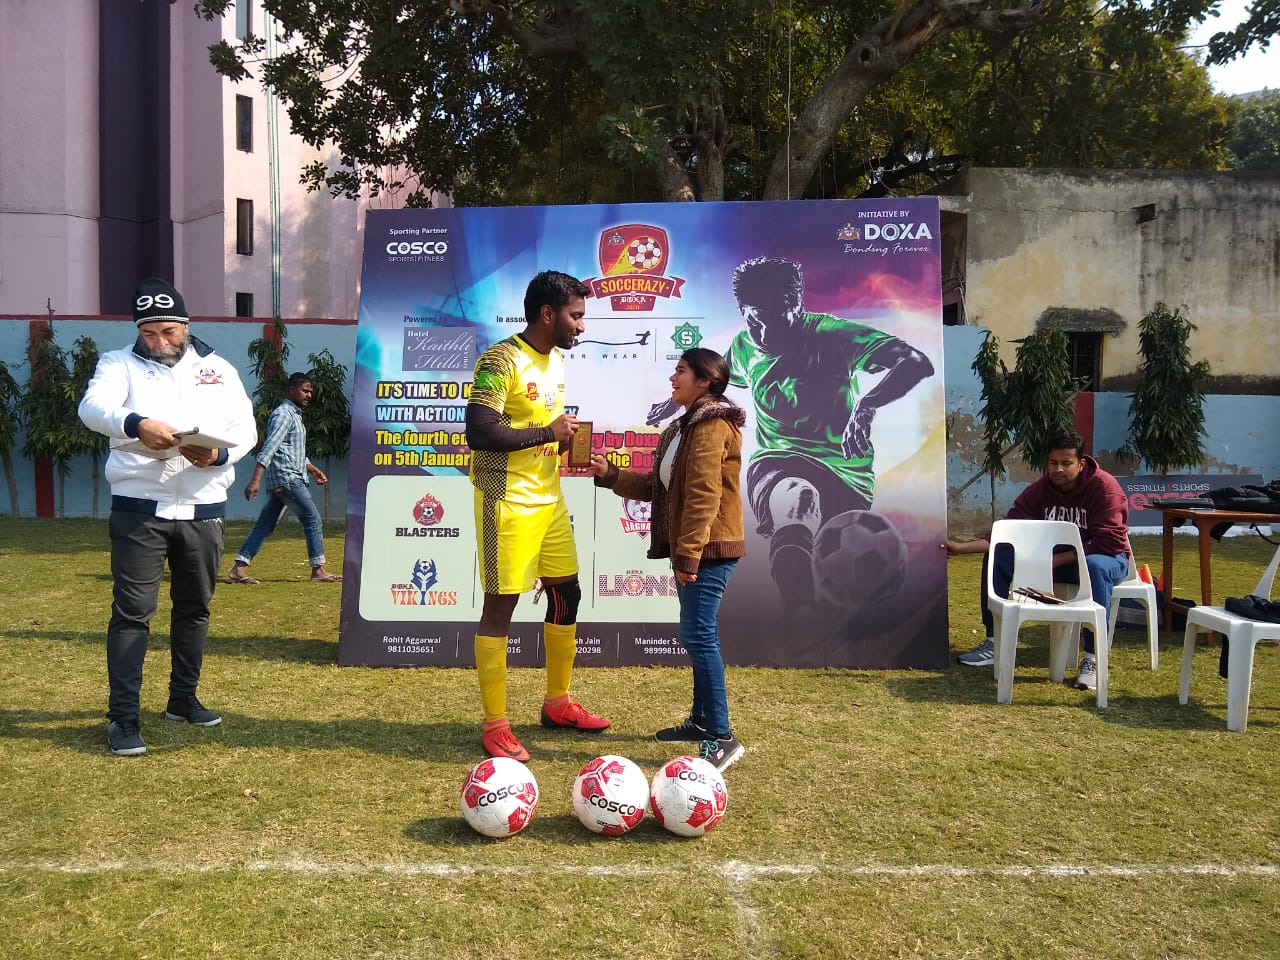 Soccerazy kicks off 4th Edition - Day 4 - 26th Jan, 2020<br>
<br>
Day 4 of the action packed league..<br>
<br>
Guaranteed excitement on & off the field!